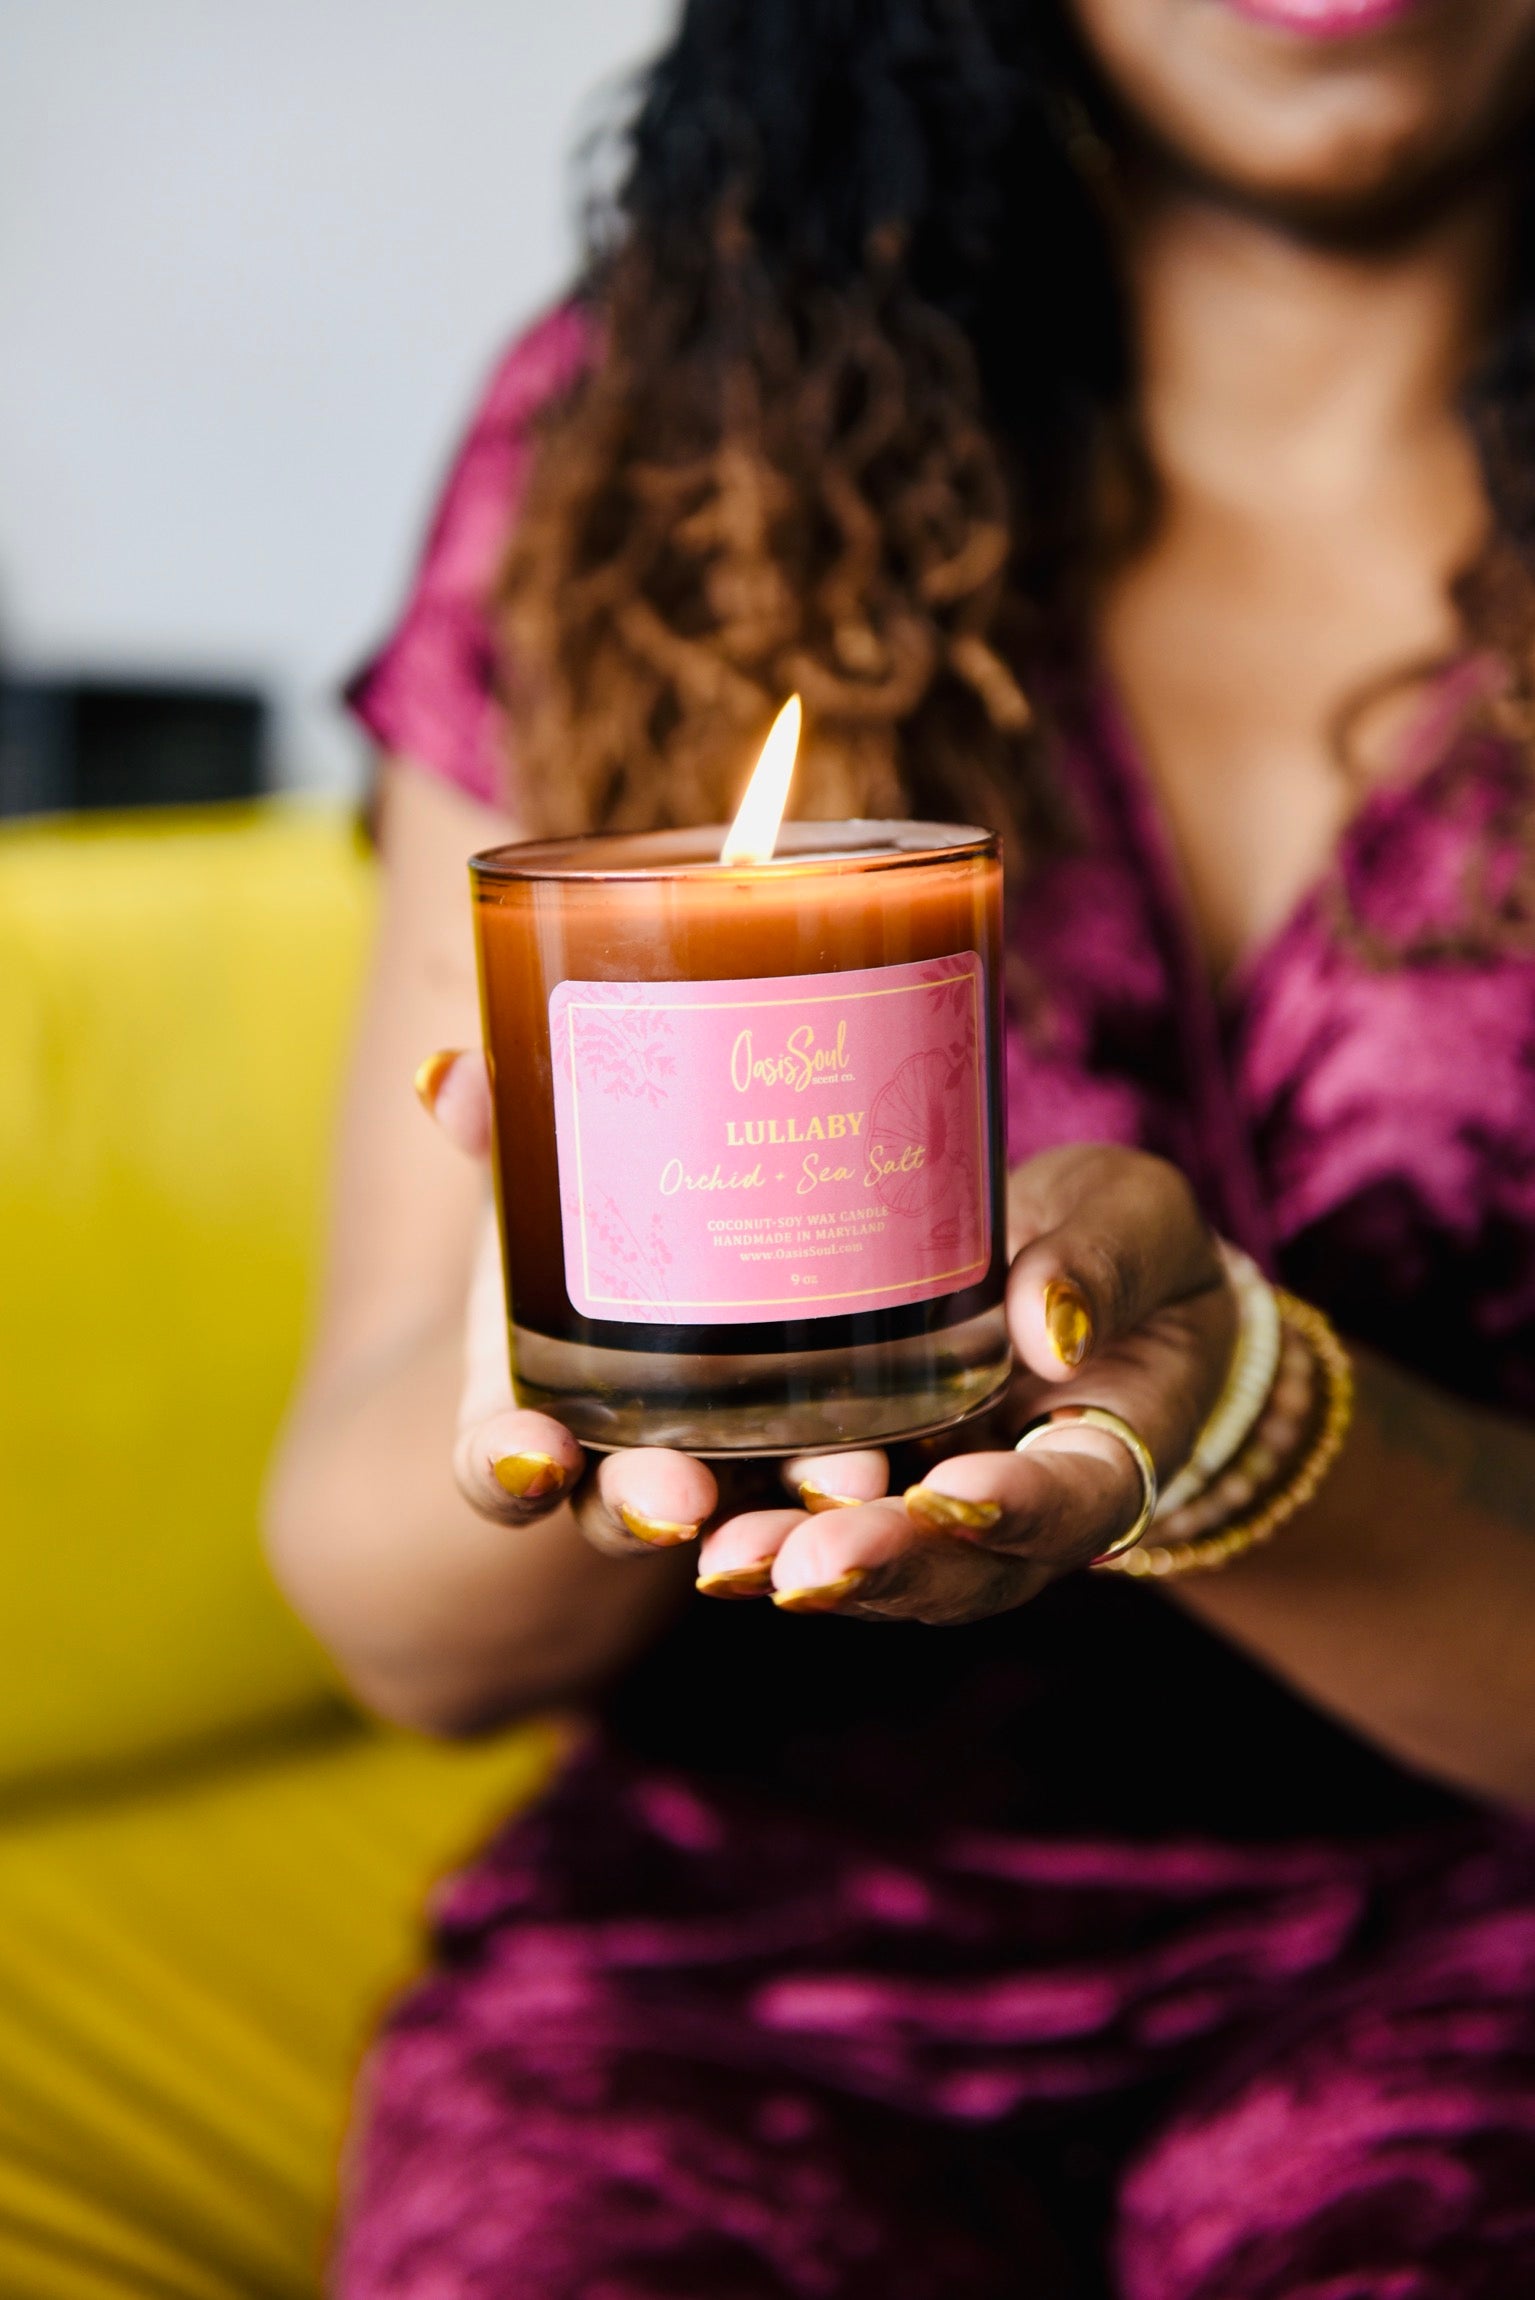 Inspiration, Scent & Song - Oasis Soul Scent Co.